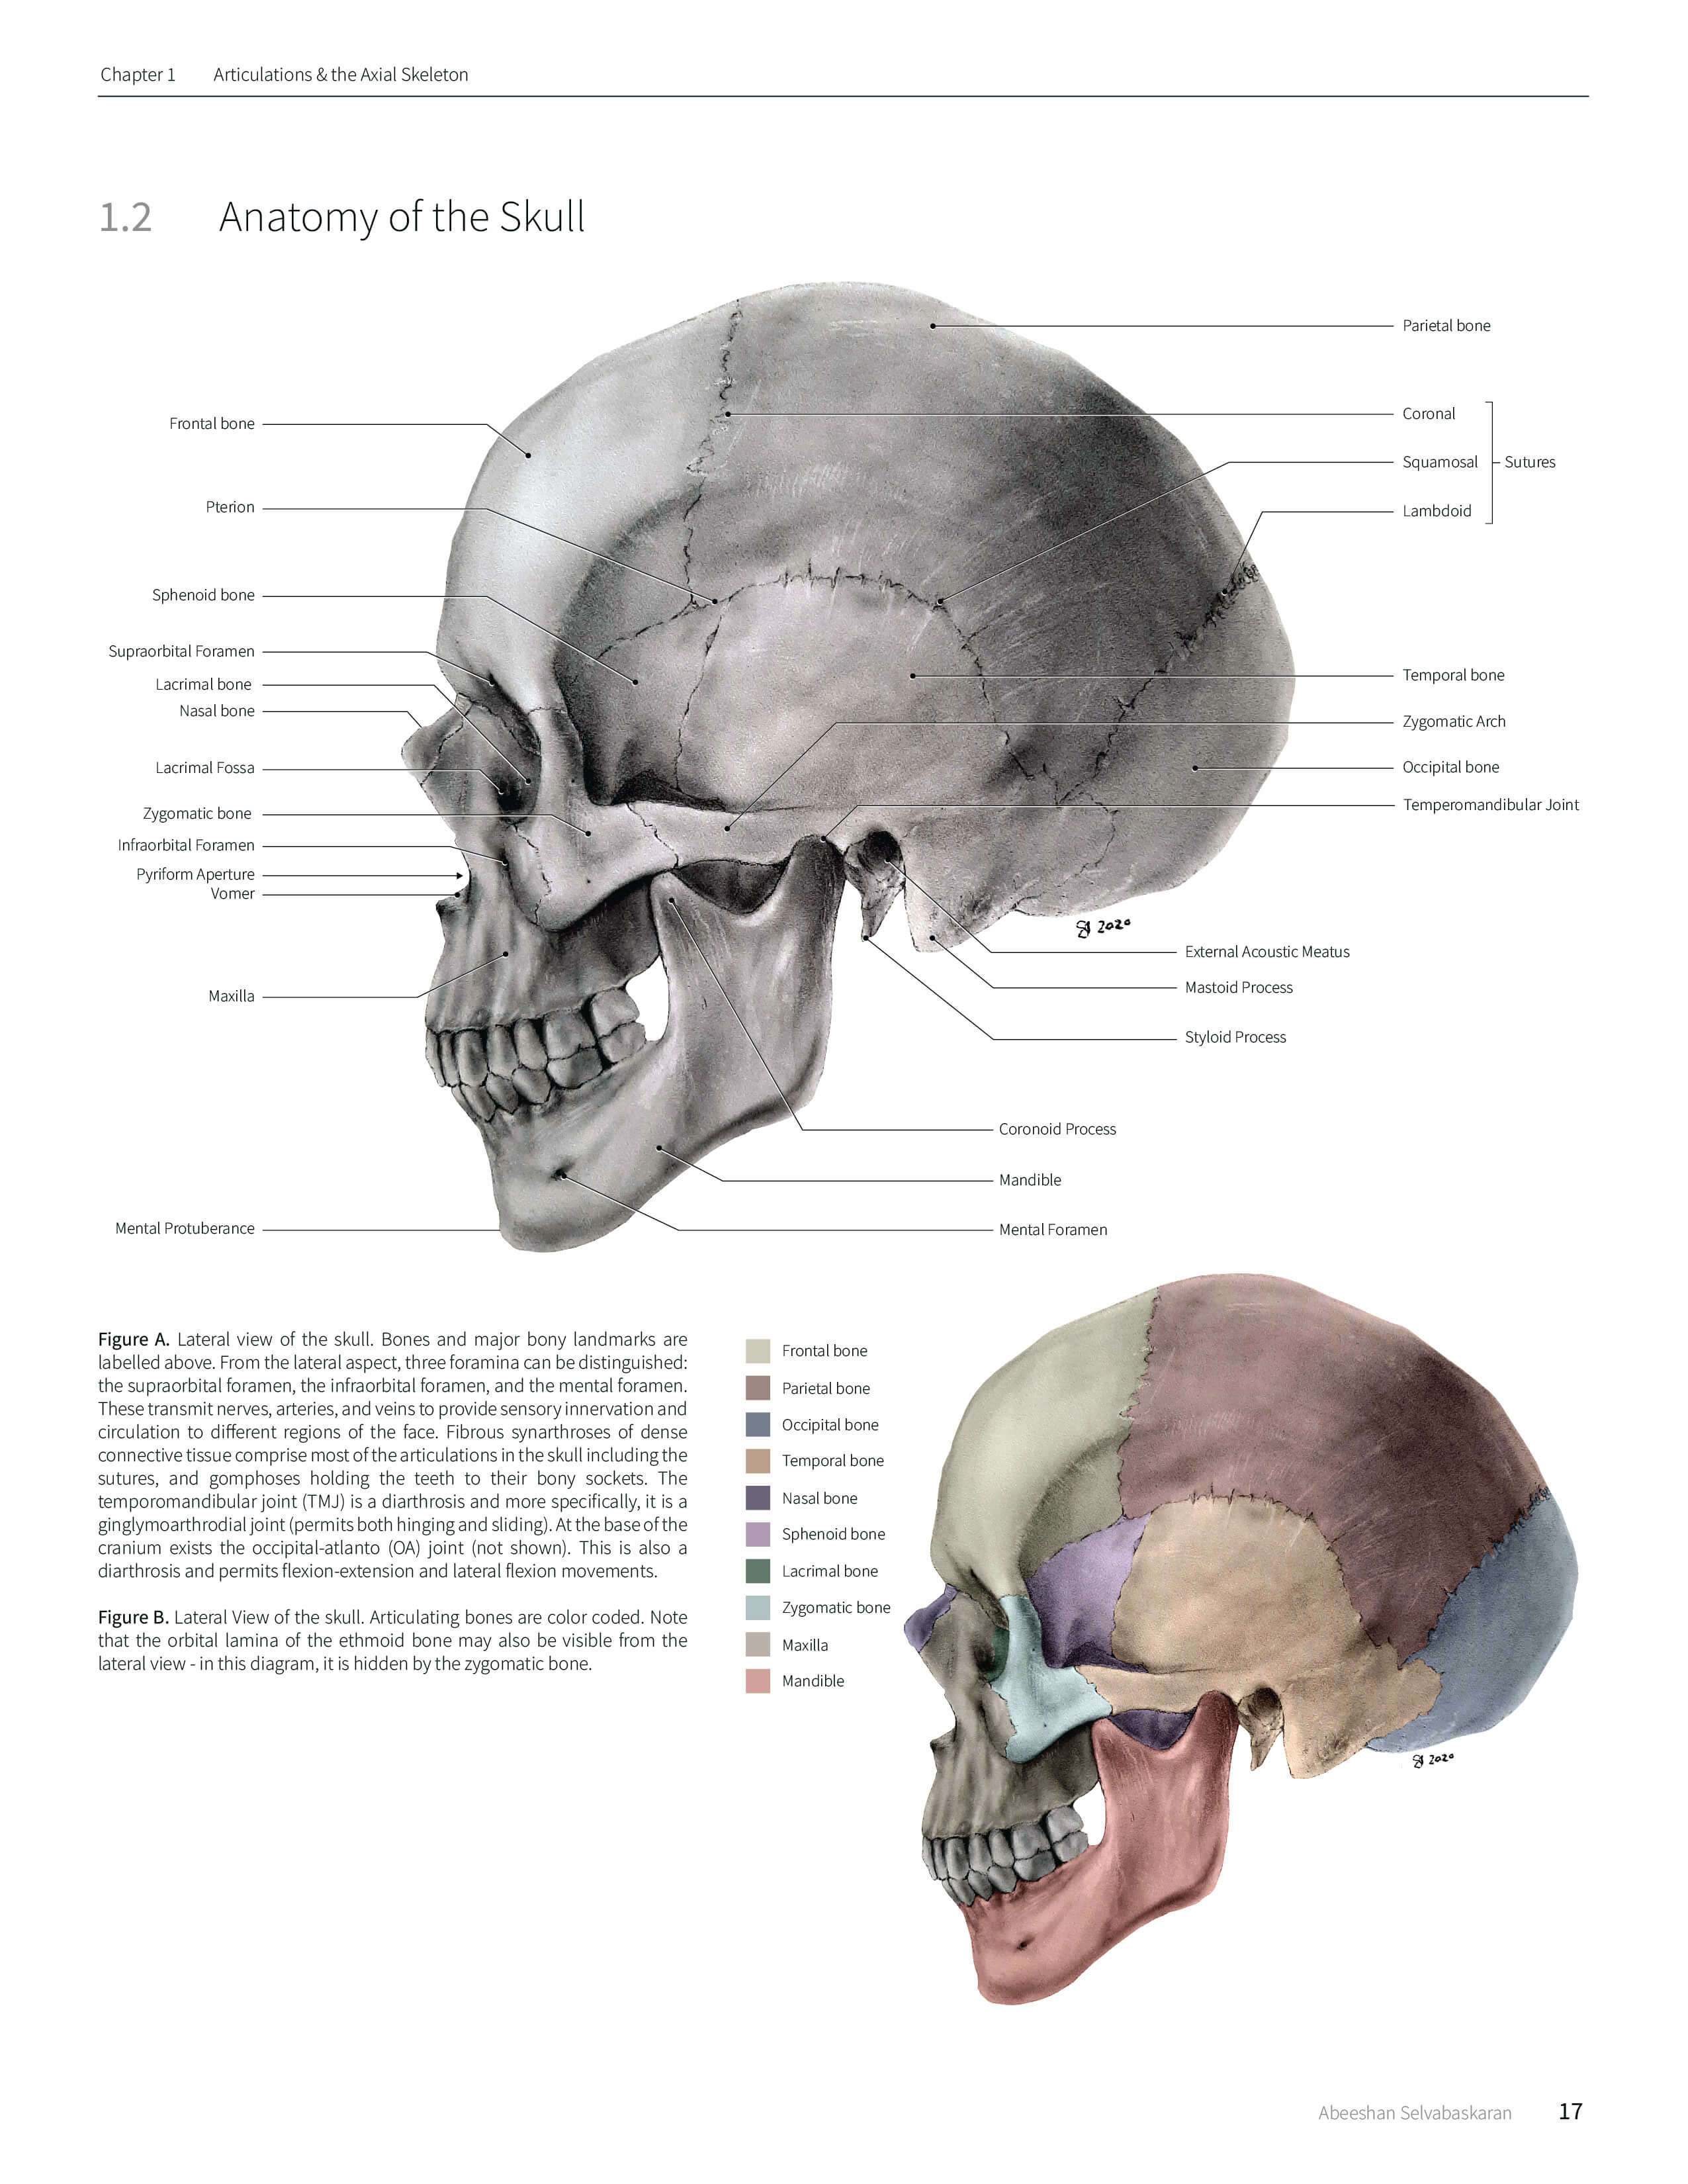 Final textbook layout of lateral skull rendering